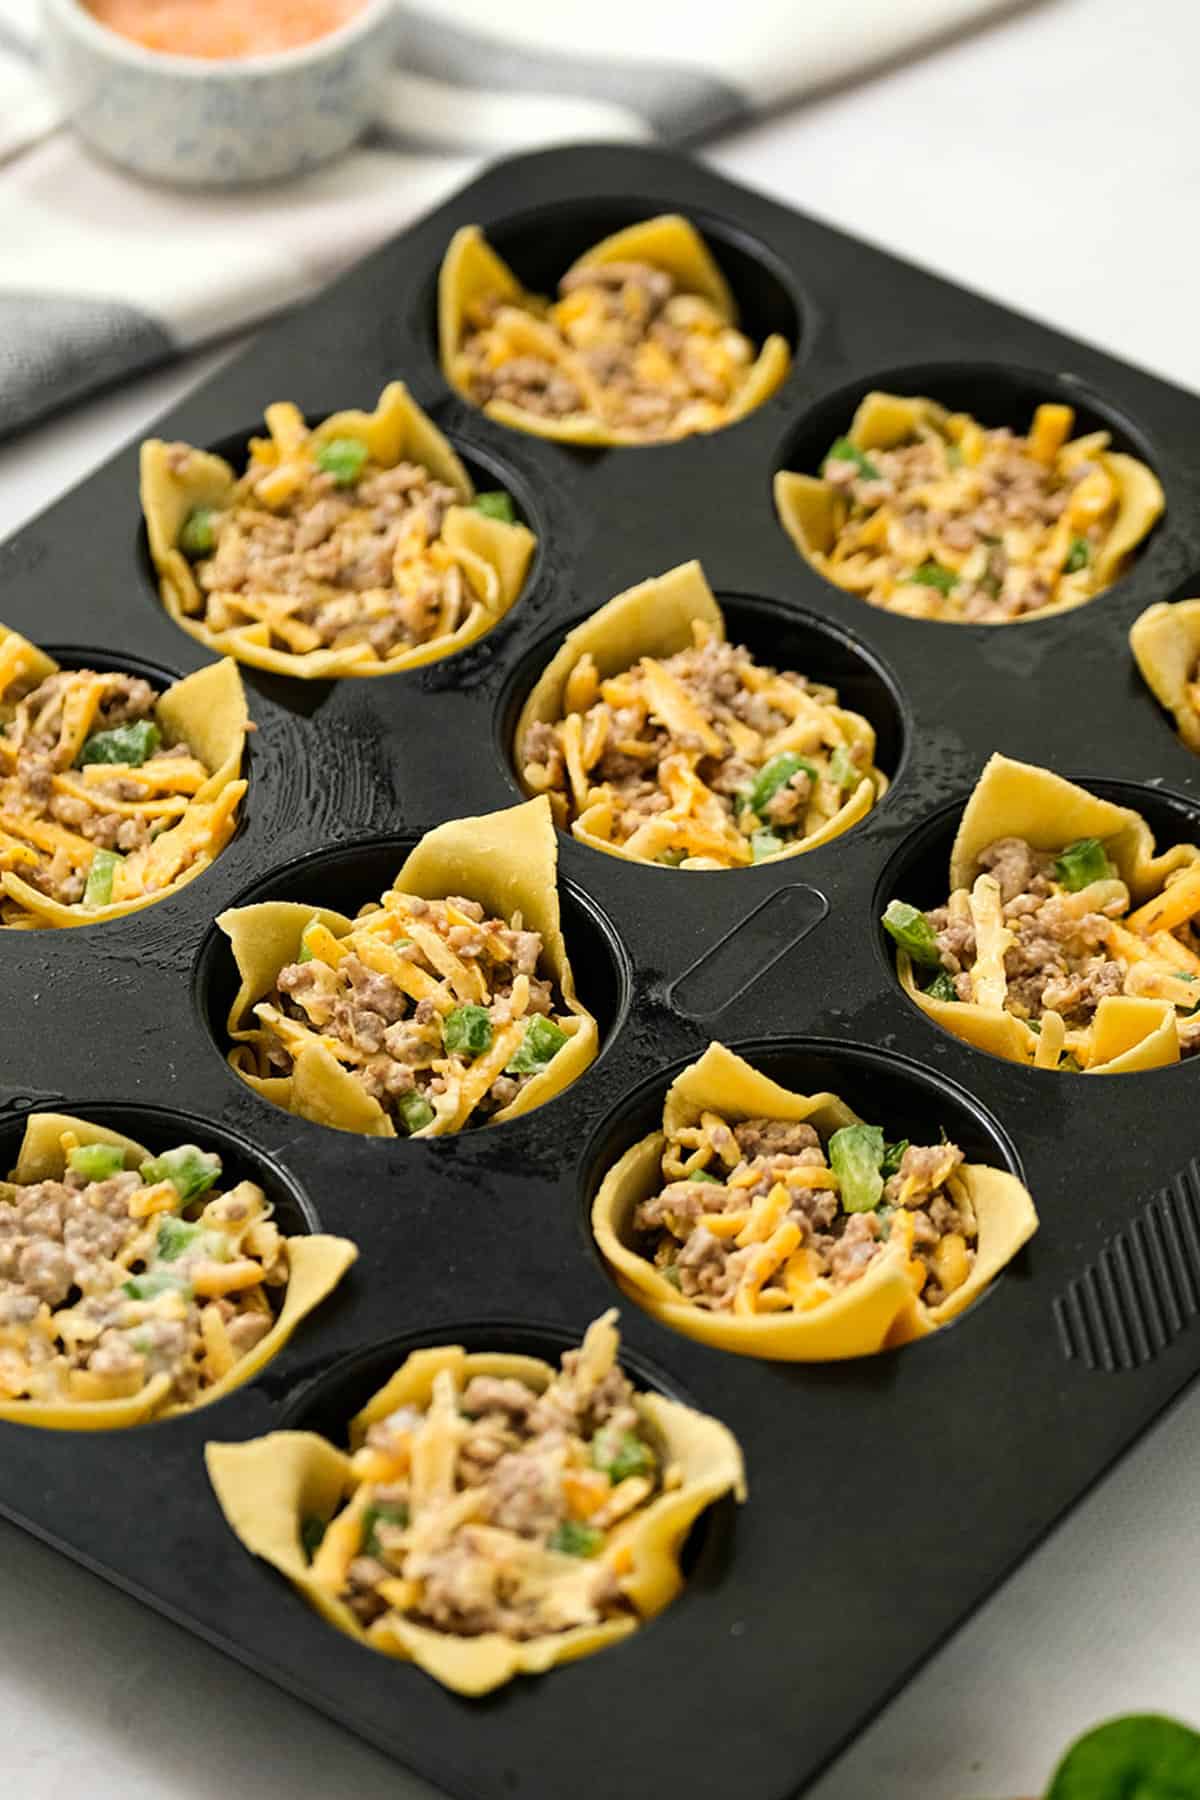 Savory Wontons Filled With Sausage and Other Ingredients Ready for Baking